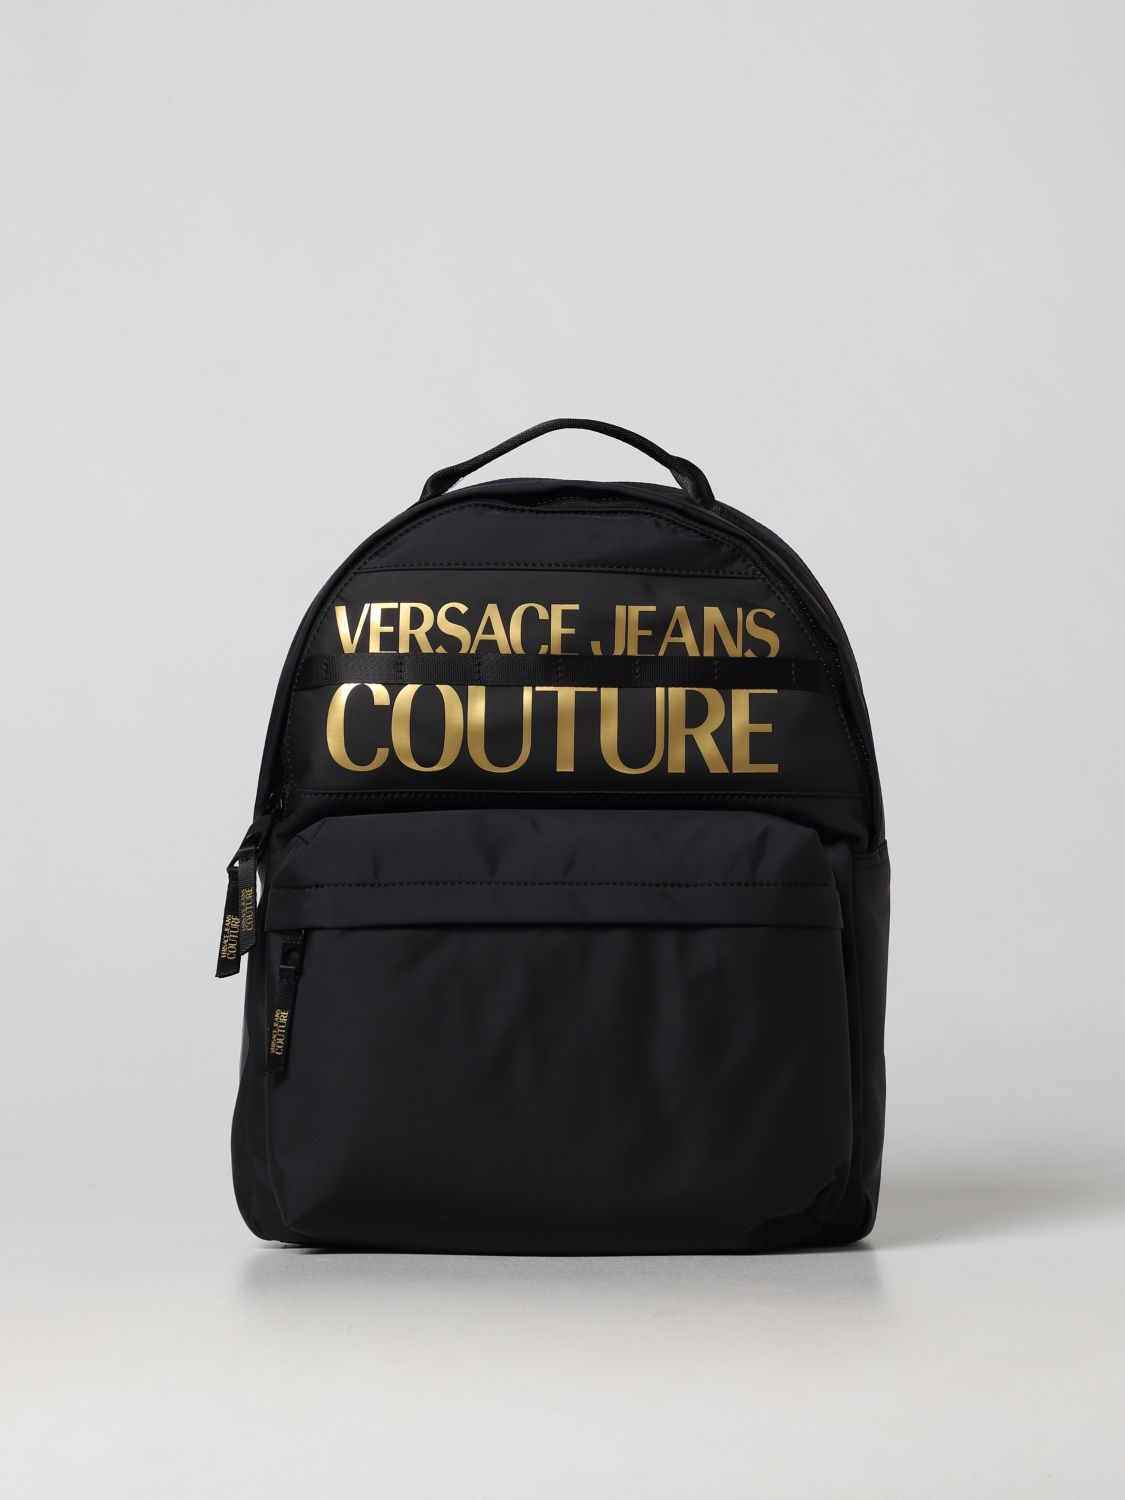 Backpack Versace Jeans Couture: Versace Jeans Couture backpack for man black 1